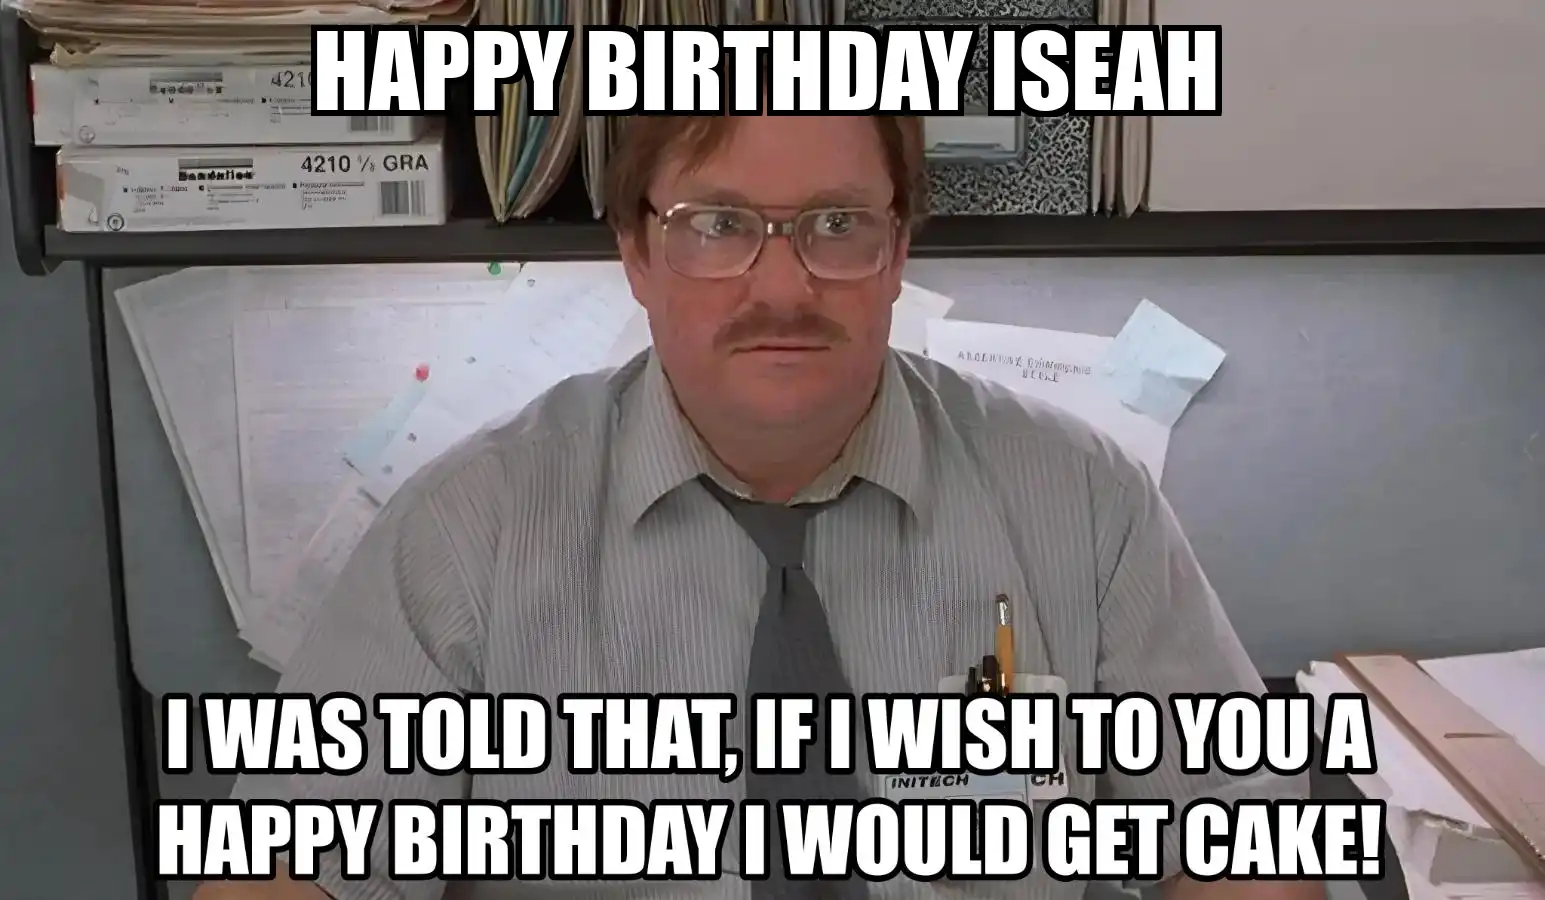 Happy Birthday Iseah I Would Get A Cake Meme